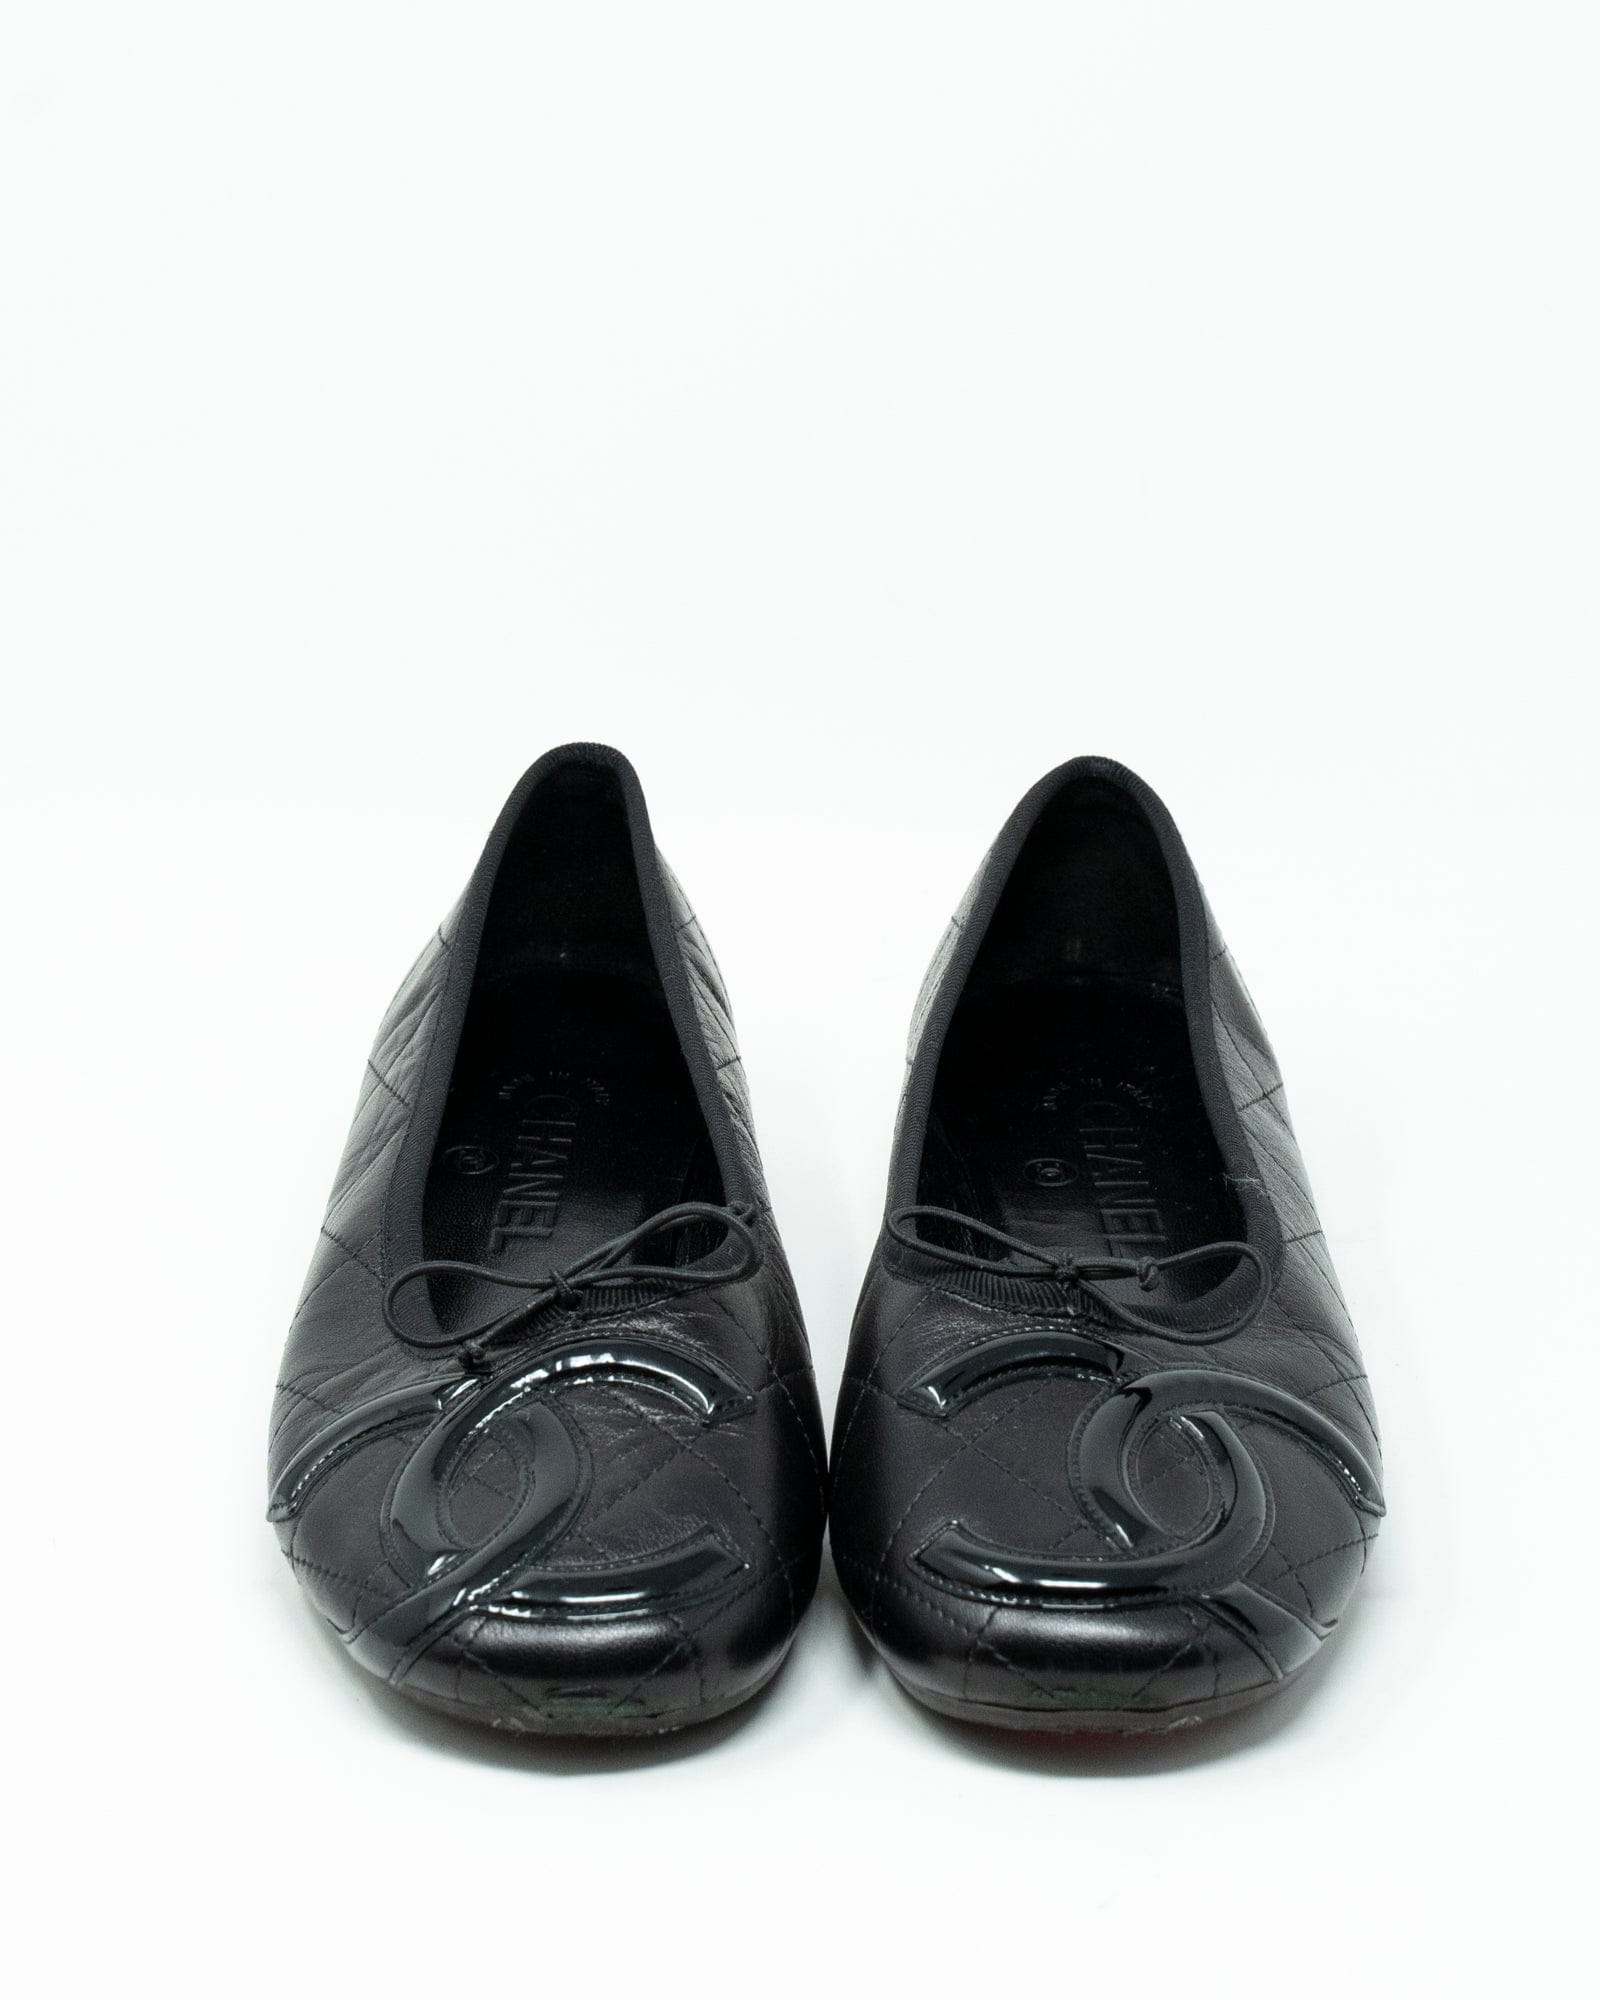 Chanel Chanel Rue Cambon Ballet Pumps Shoes size 37 - AWC1179